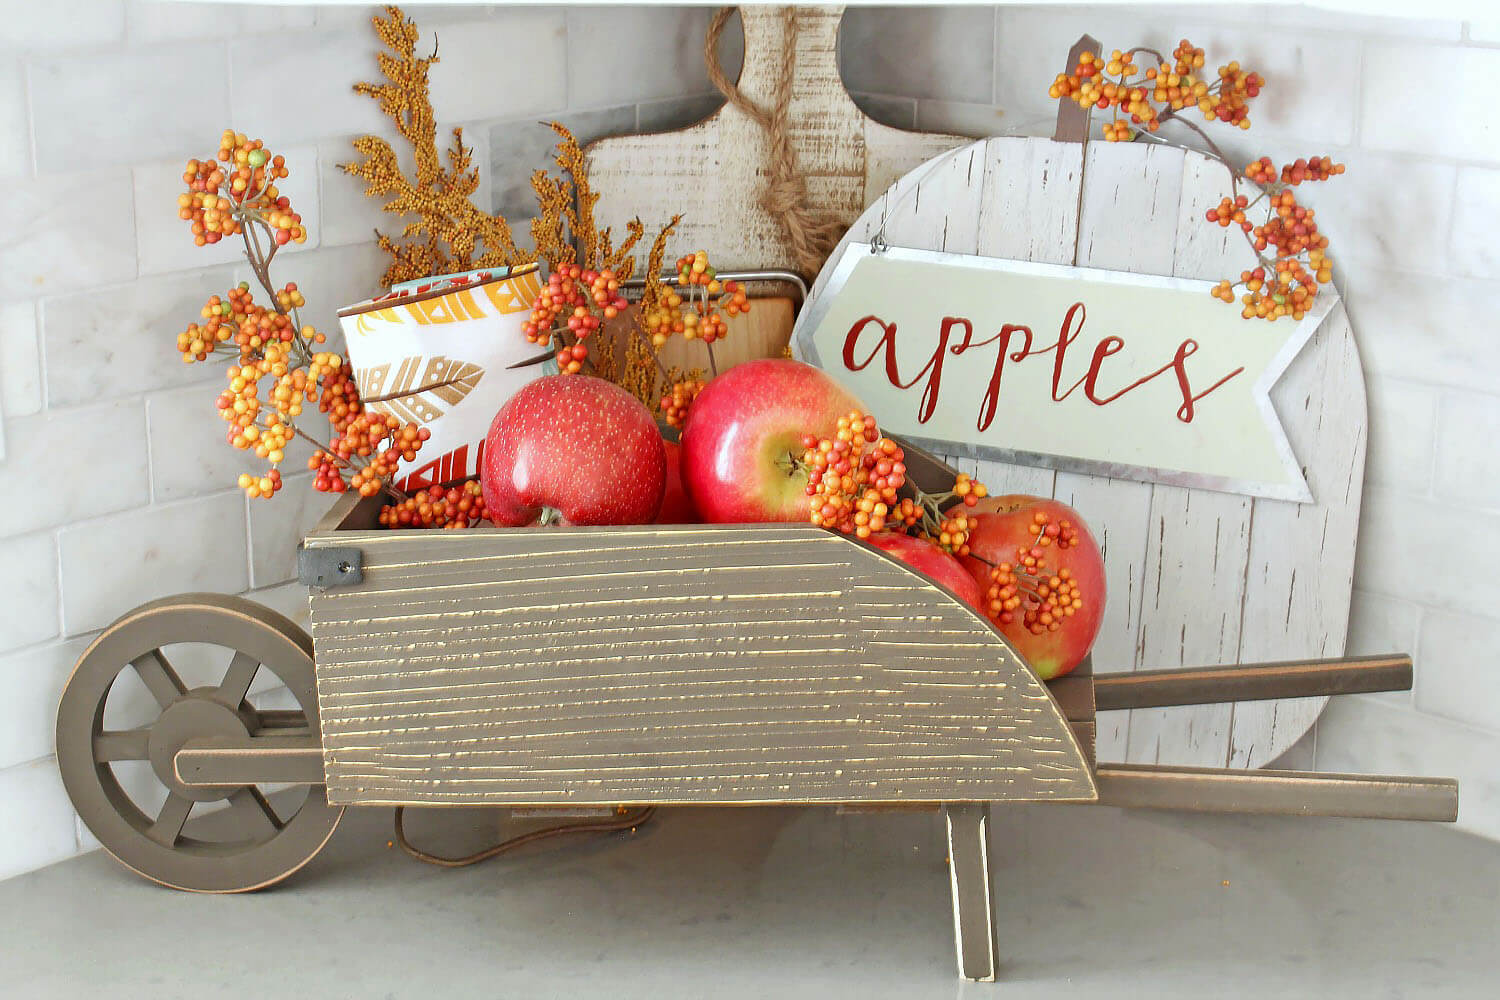 Apples as decorative elements in the fall.